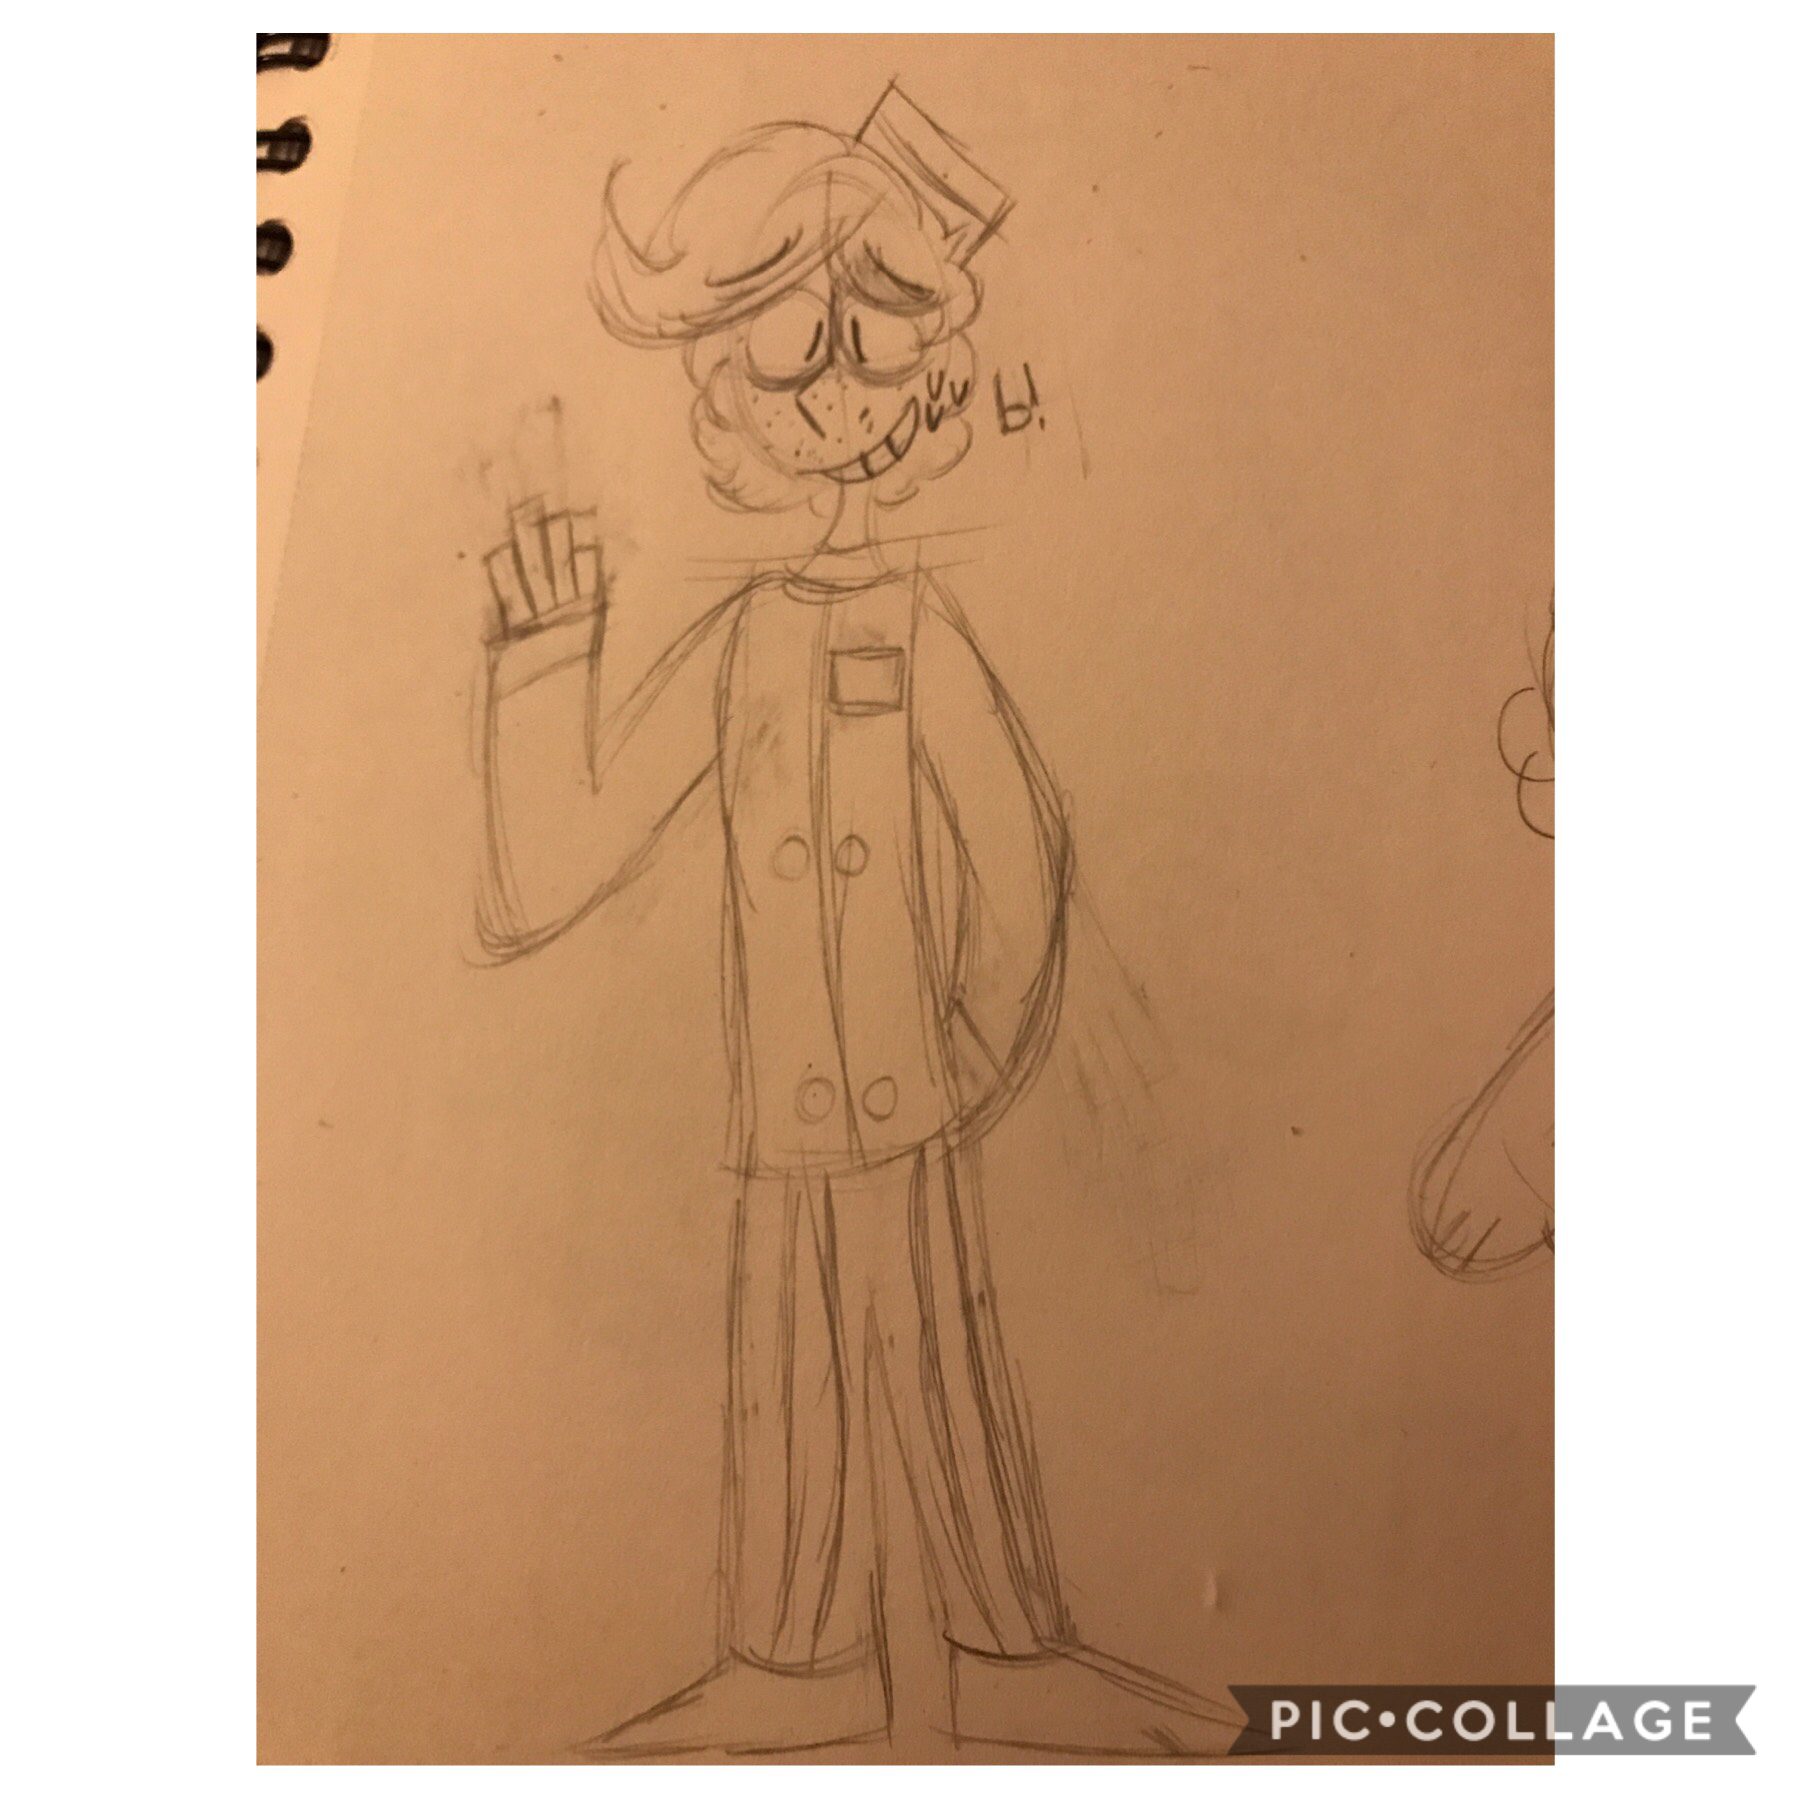 god dang i hate drawing full bodies and i dont do it that much so this probably sucks a lot